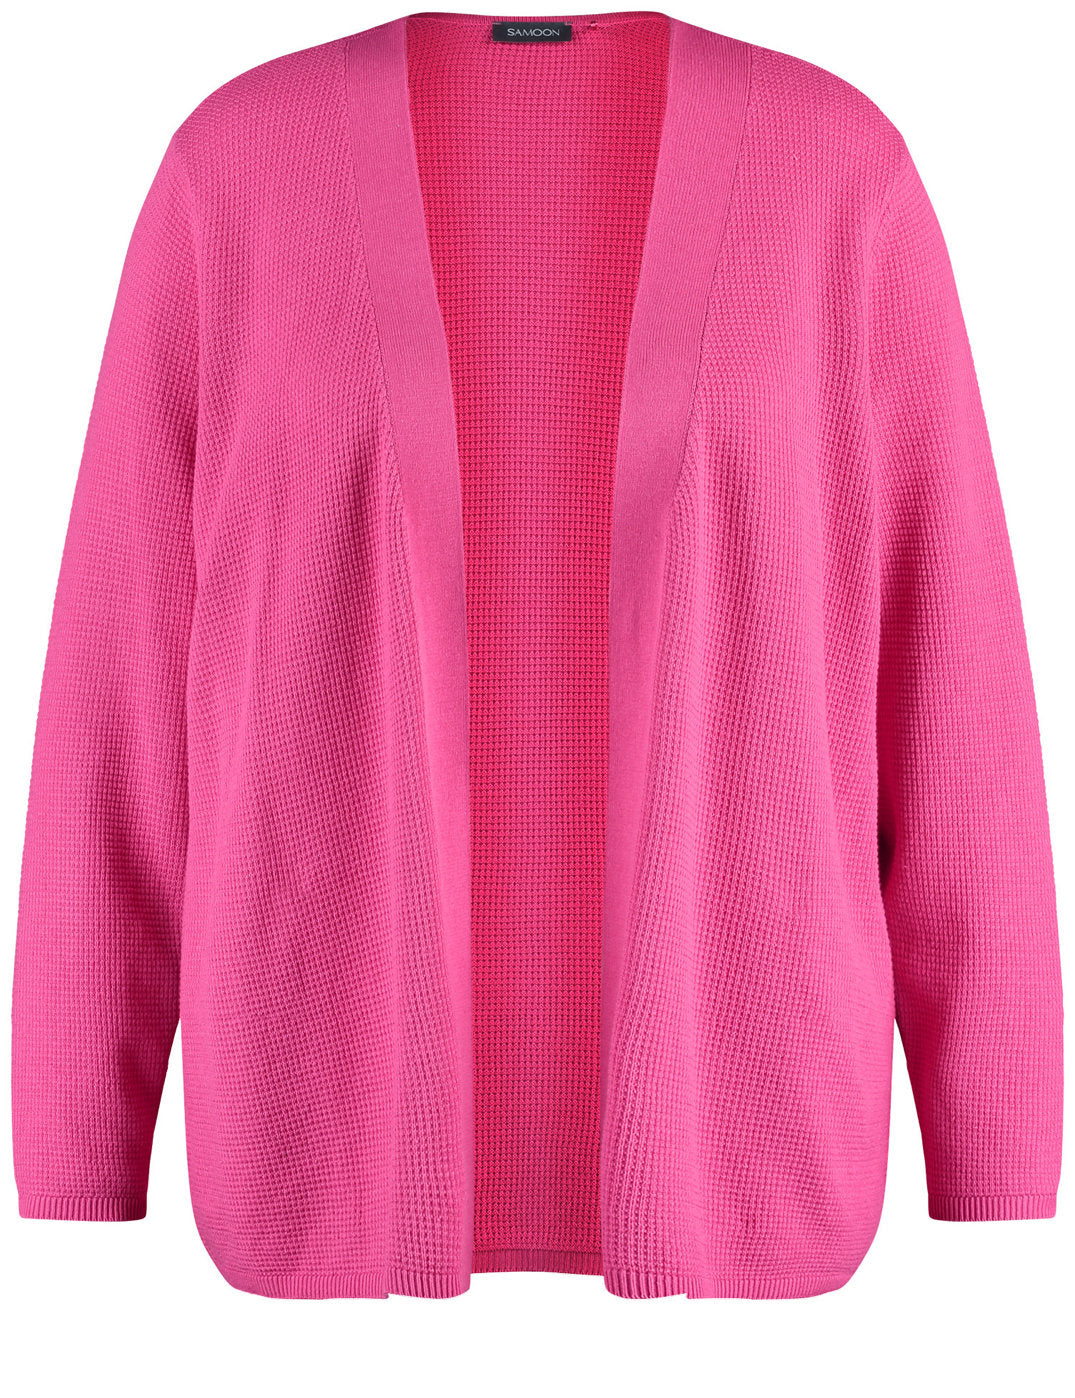 Open Cardigan In A Textured Knit_432002-25103_3440_02